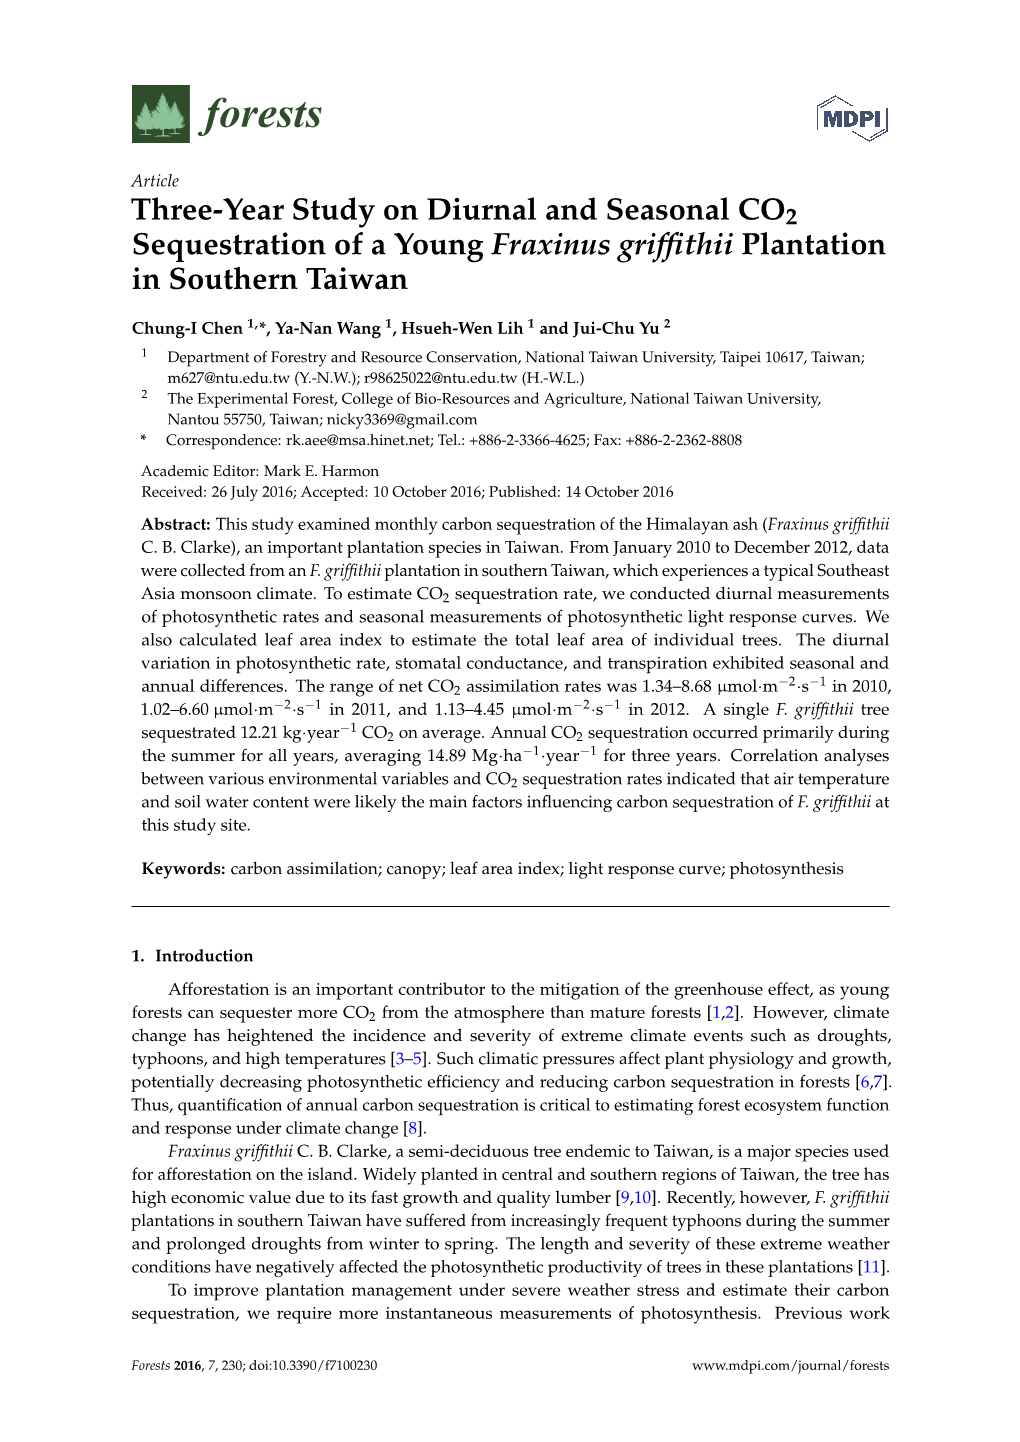 Three-Year Study on Diurnal and Seasonal CO2 Sequestration of a Young Fraxinus Grifﬁthii Plantation in Southern Taiwan